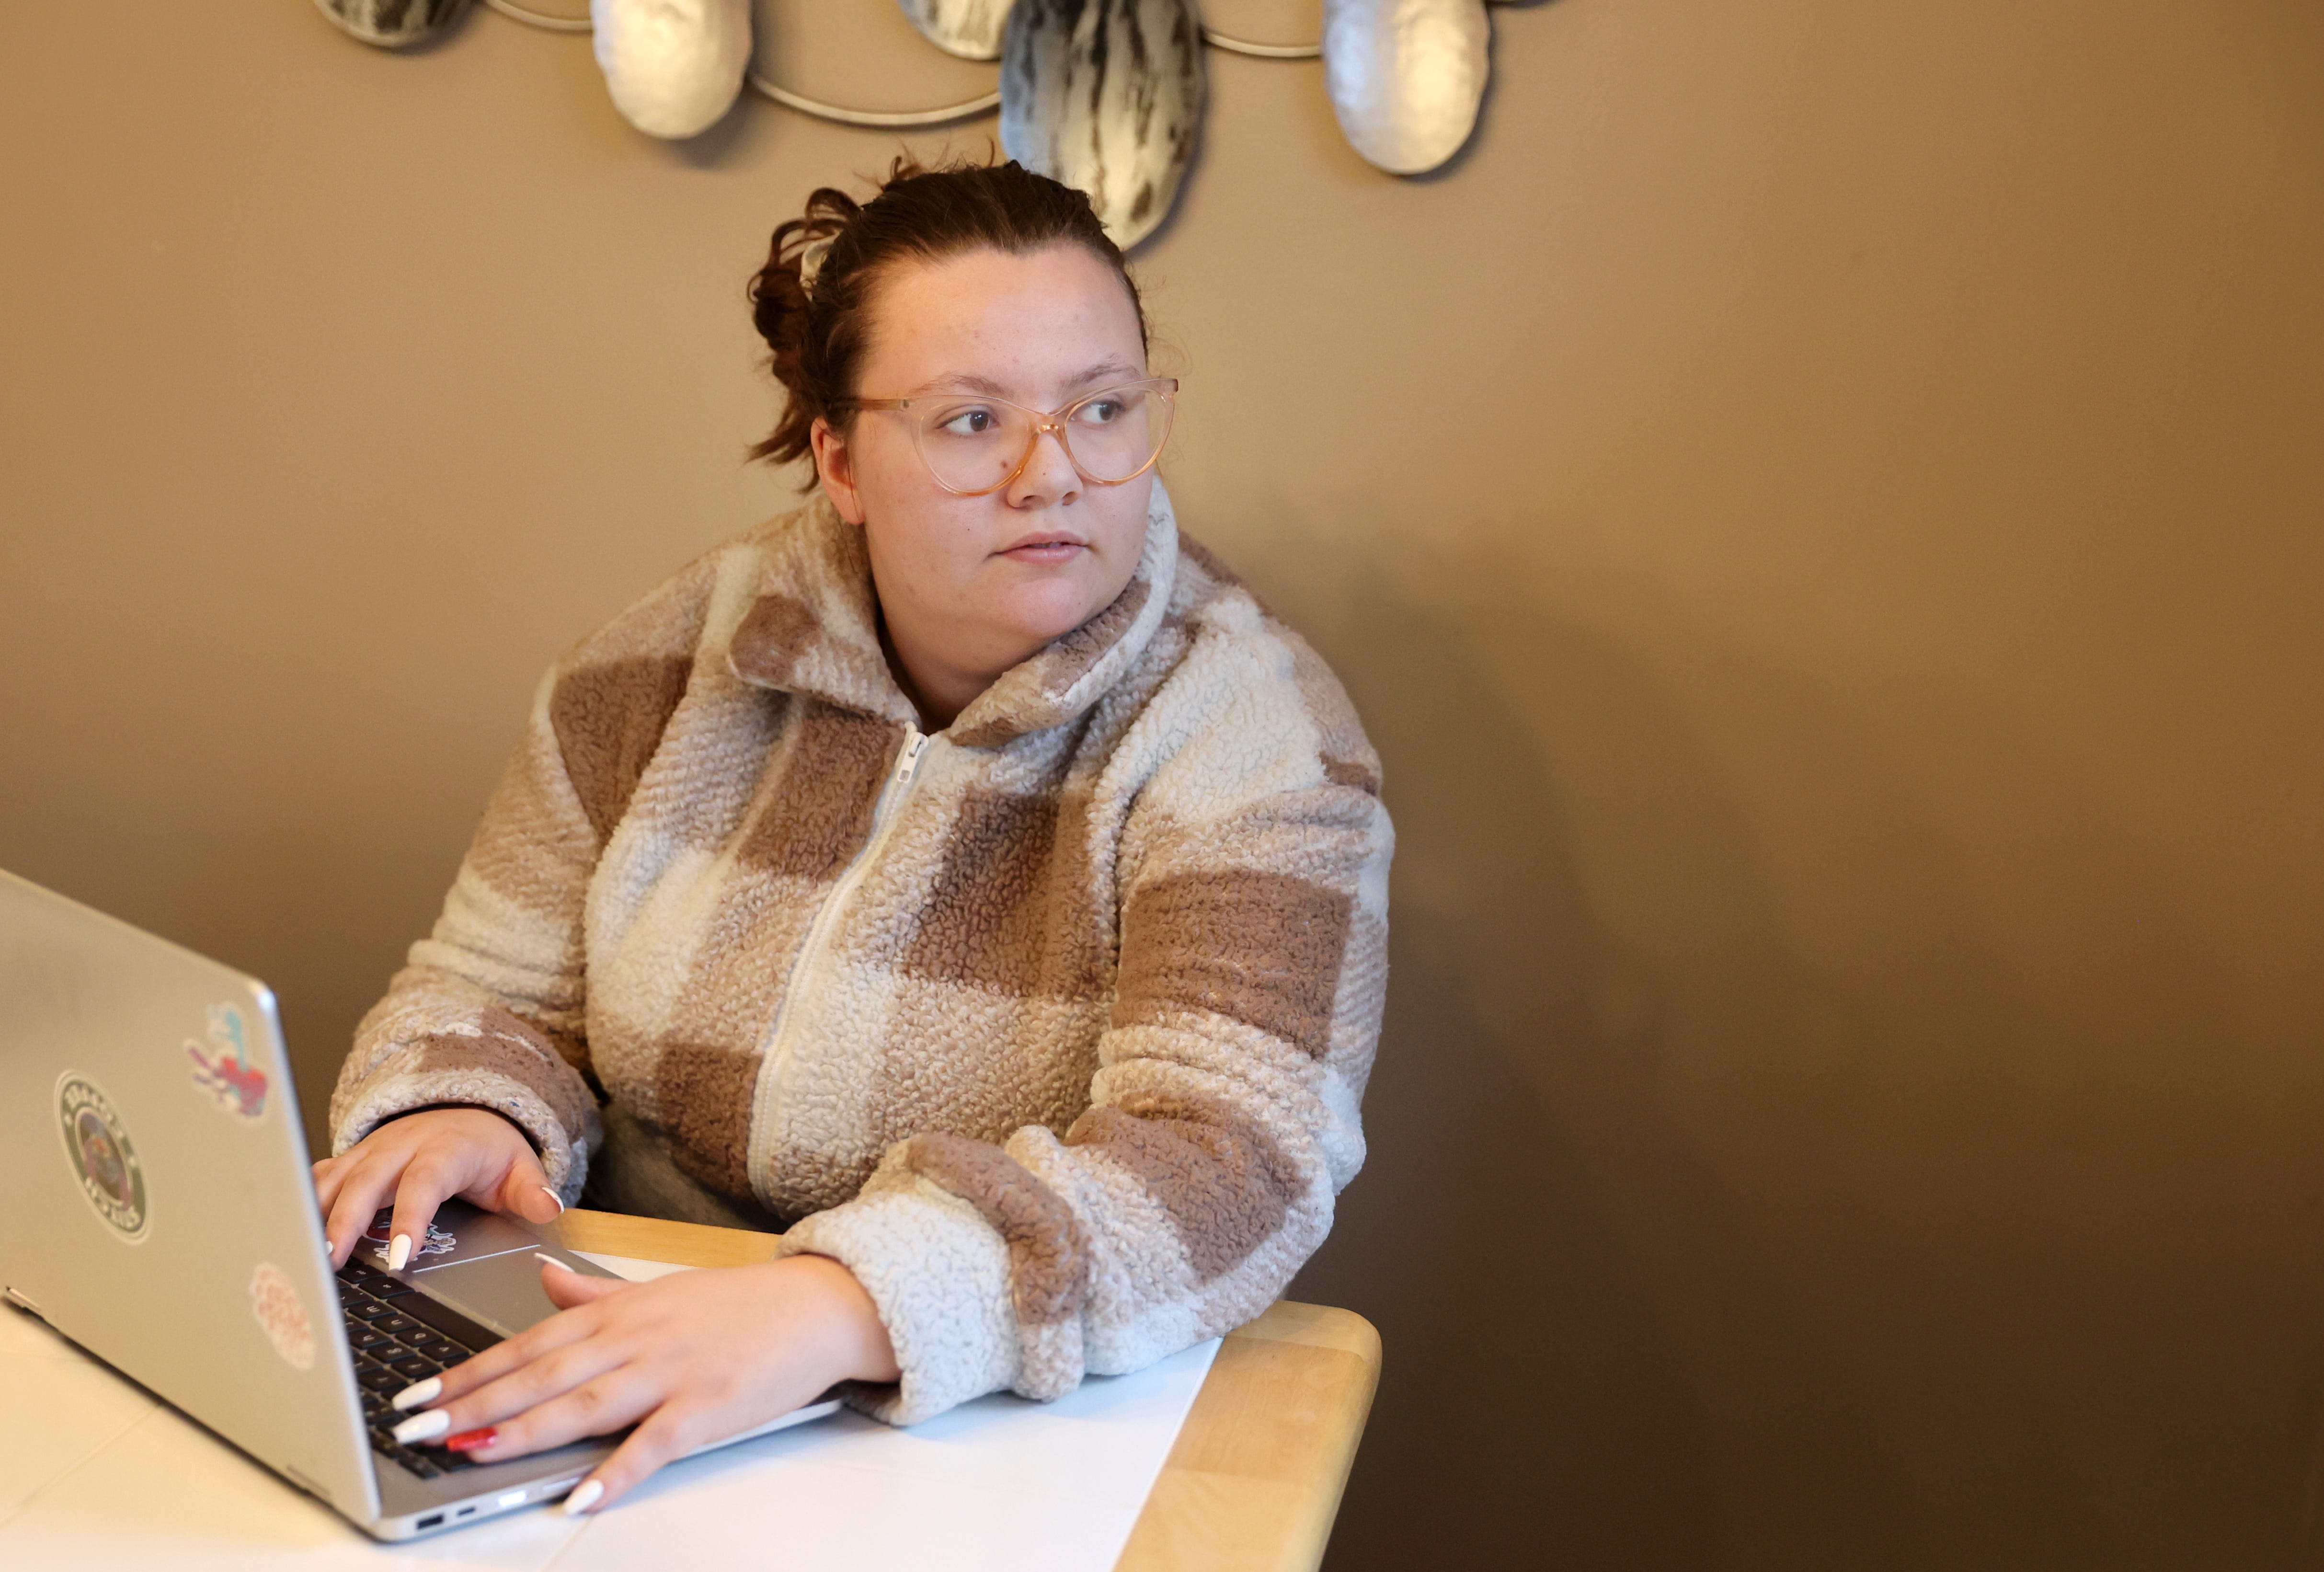 'This shouldn't be normal': Her Facebook account was hacked. It took 7 months to get it back.